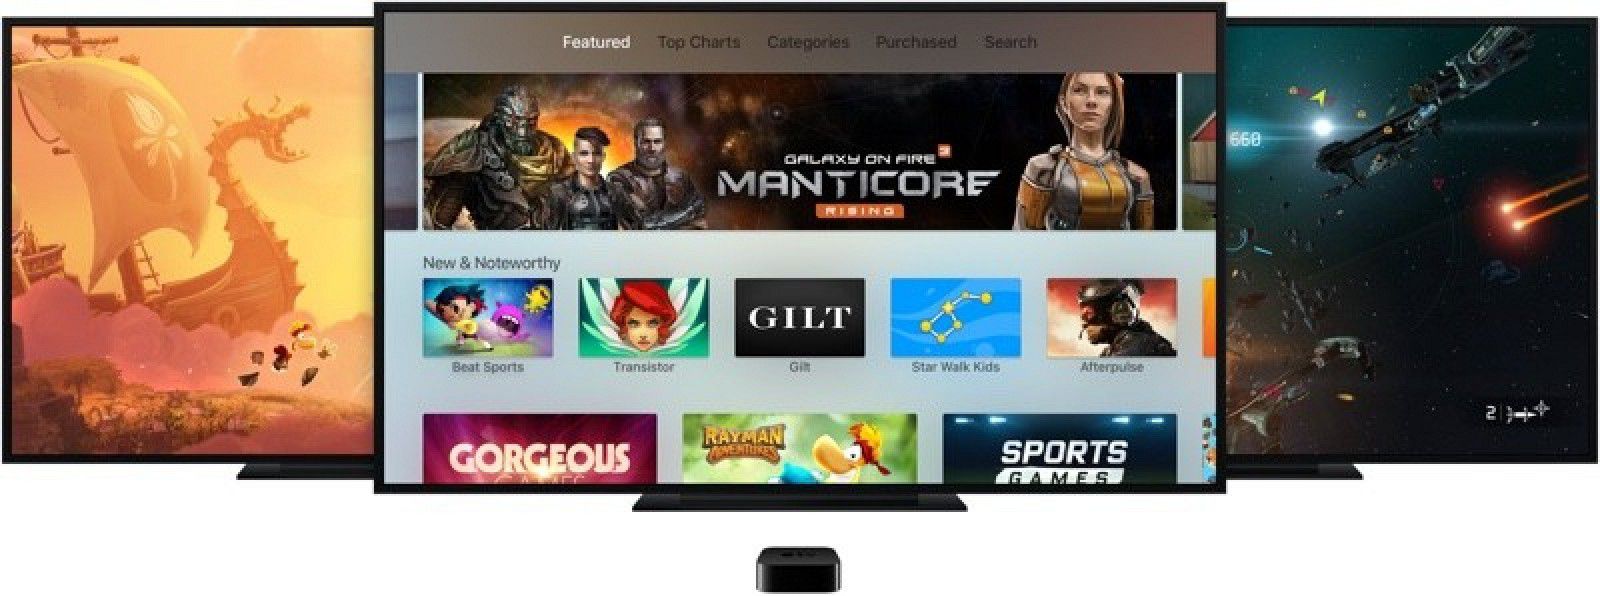 Apple executives discussed not “leaving money on the table” when deciding on Apple TV subscription fees